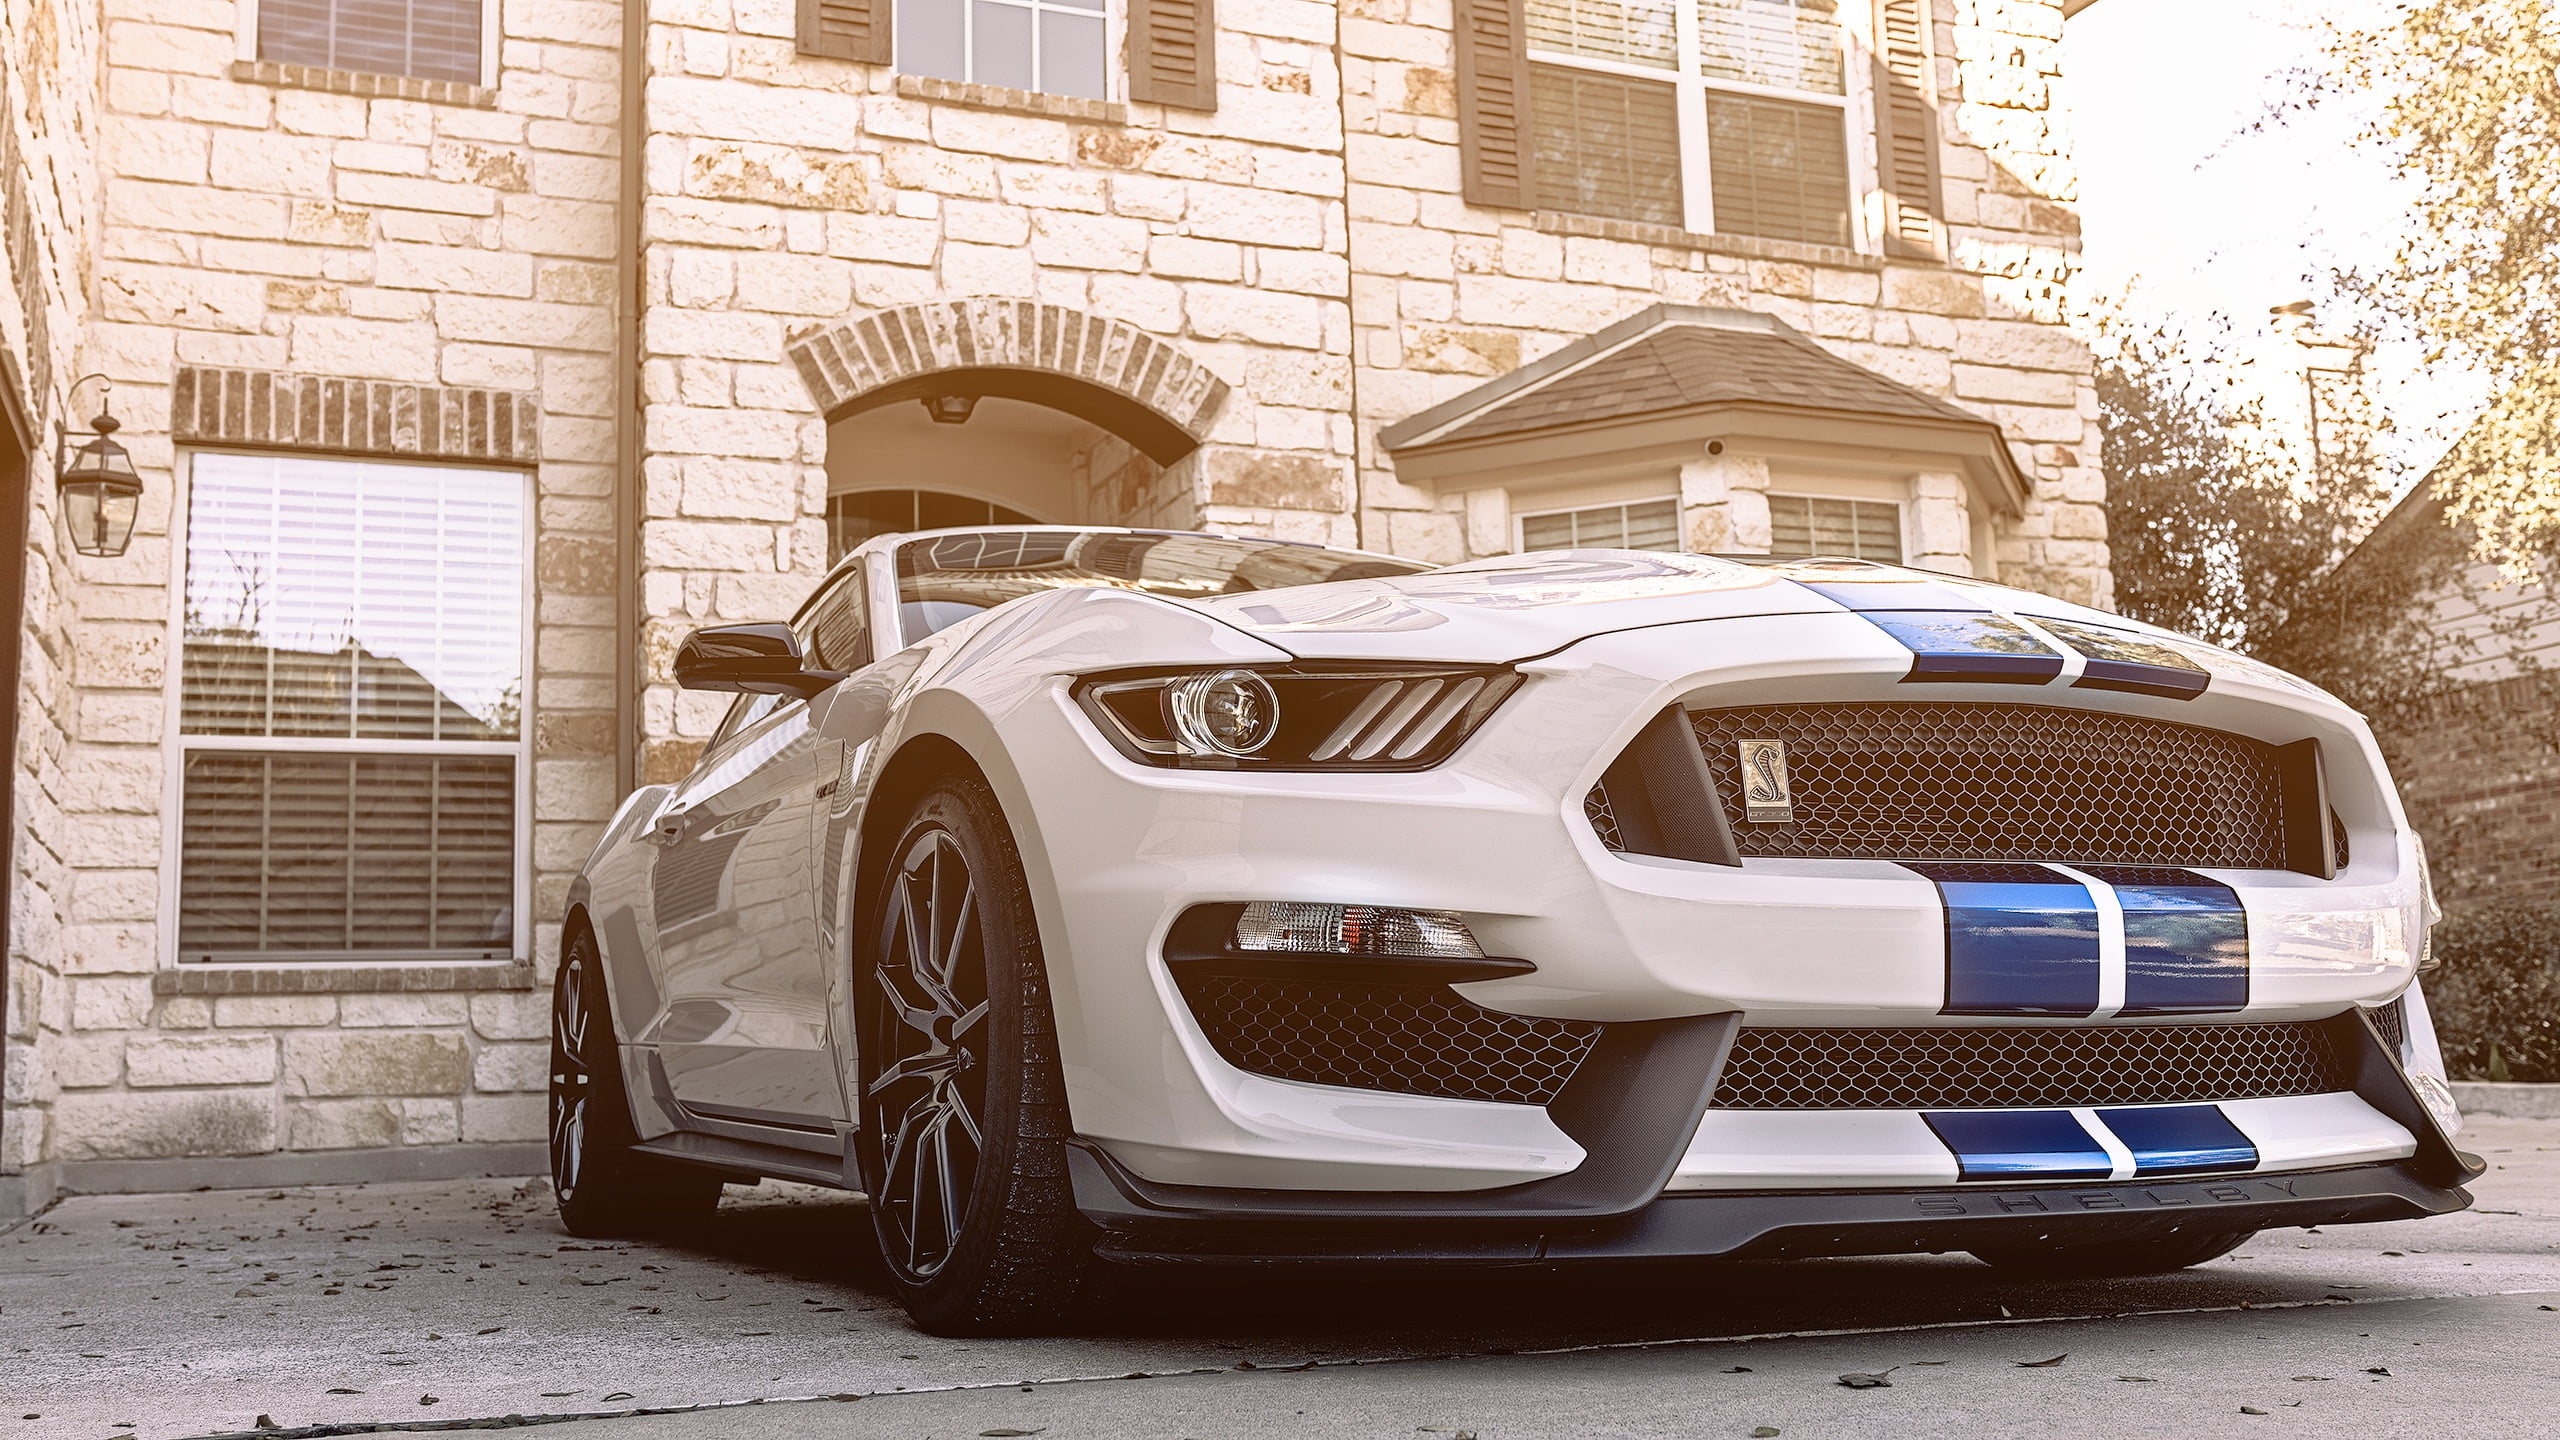 White Coupe Ford Mustang Shelby Gt350 2018 Hd Wallpaper Wallpaper Flare